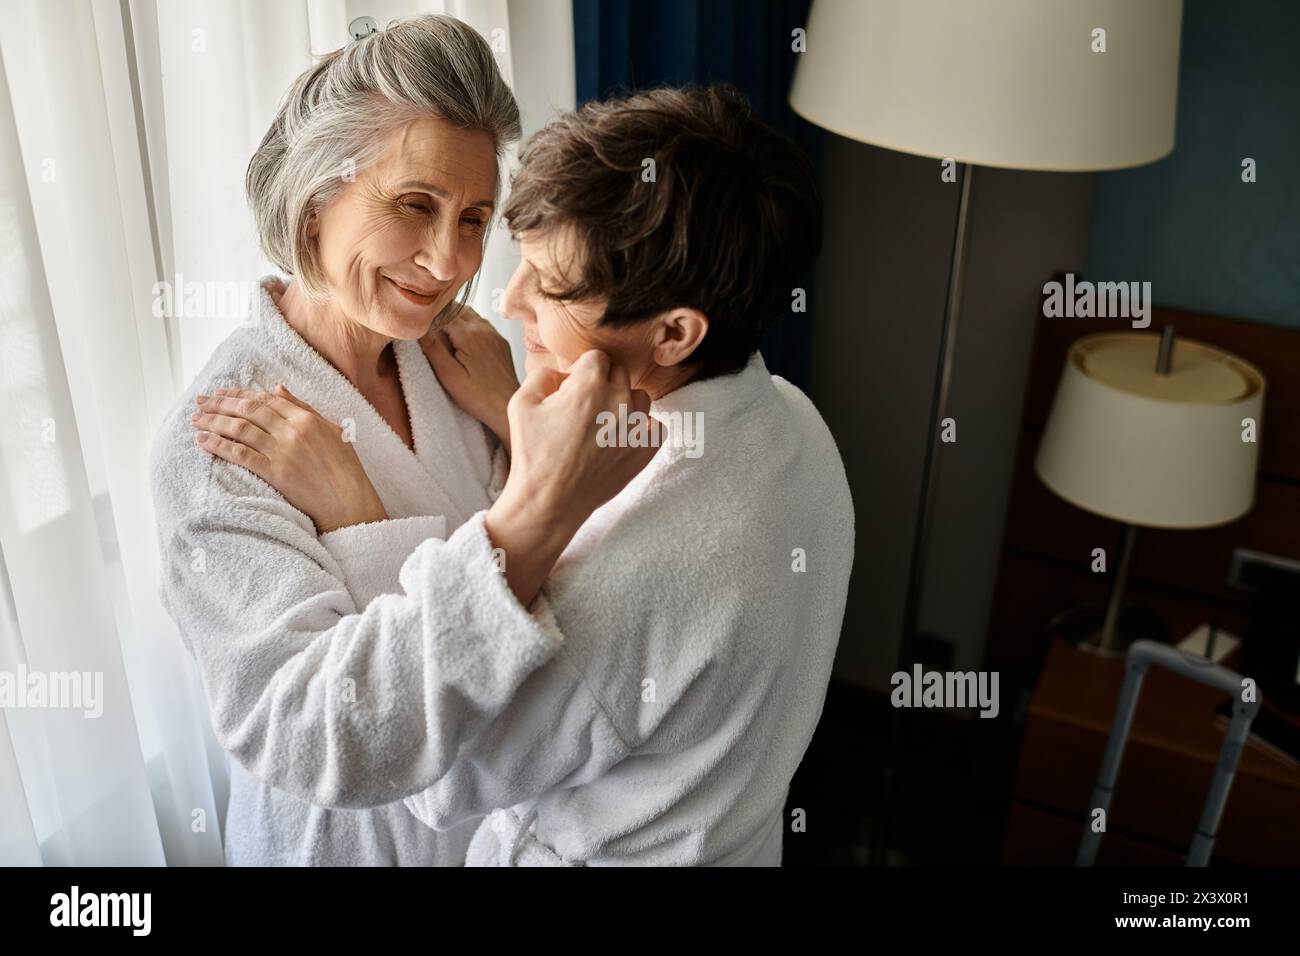 A senior lesbian couple in bathrobes sharing a tender embrace in a hotel. Stock Photo